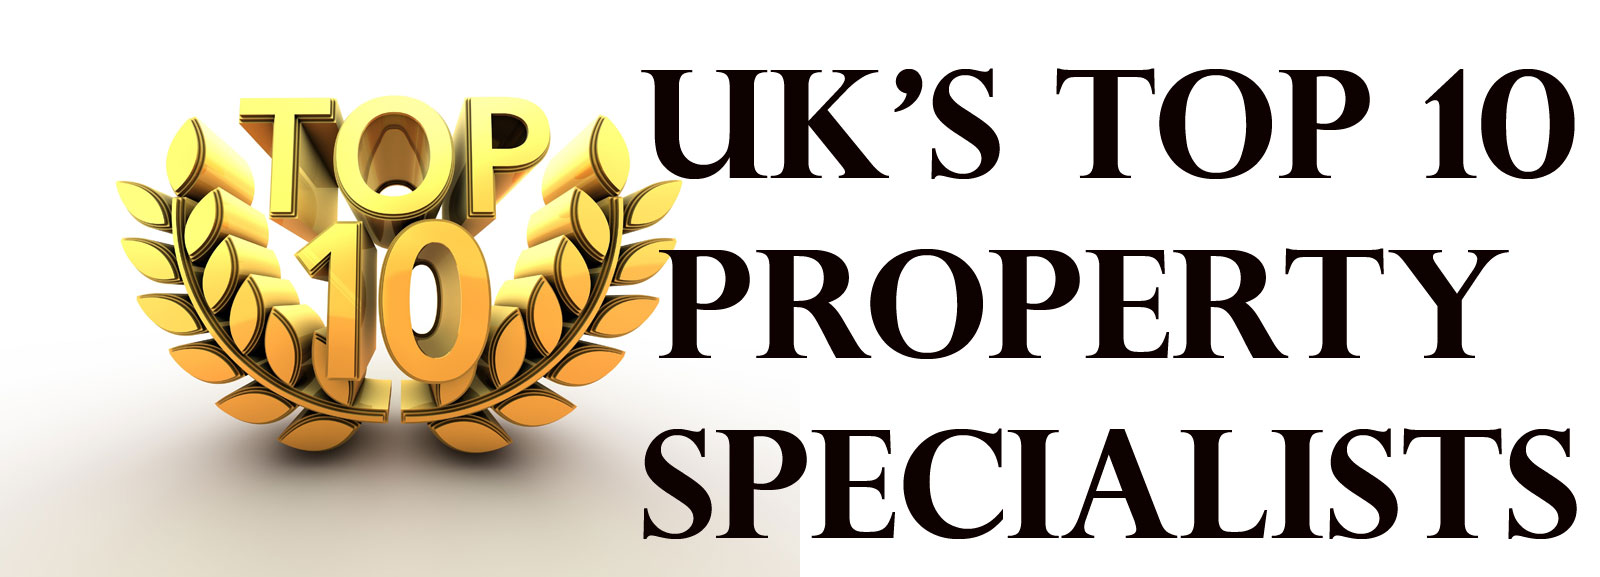 Who are the UK's top ten property specialists of 2019?